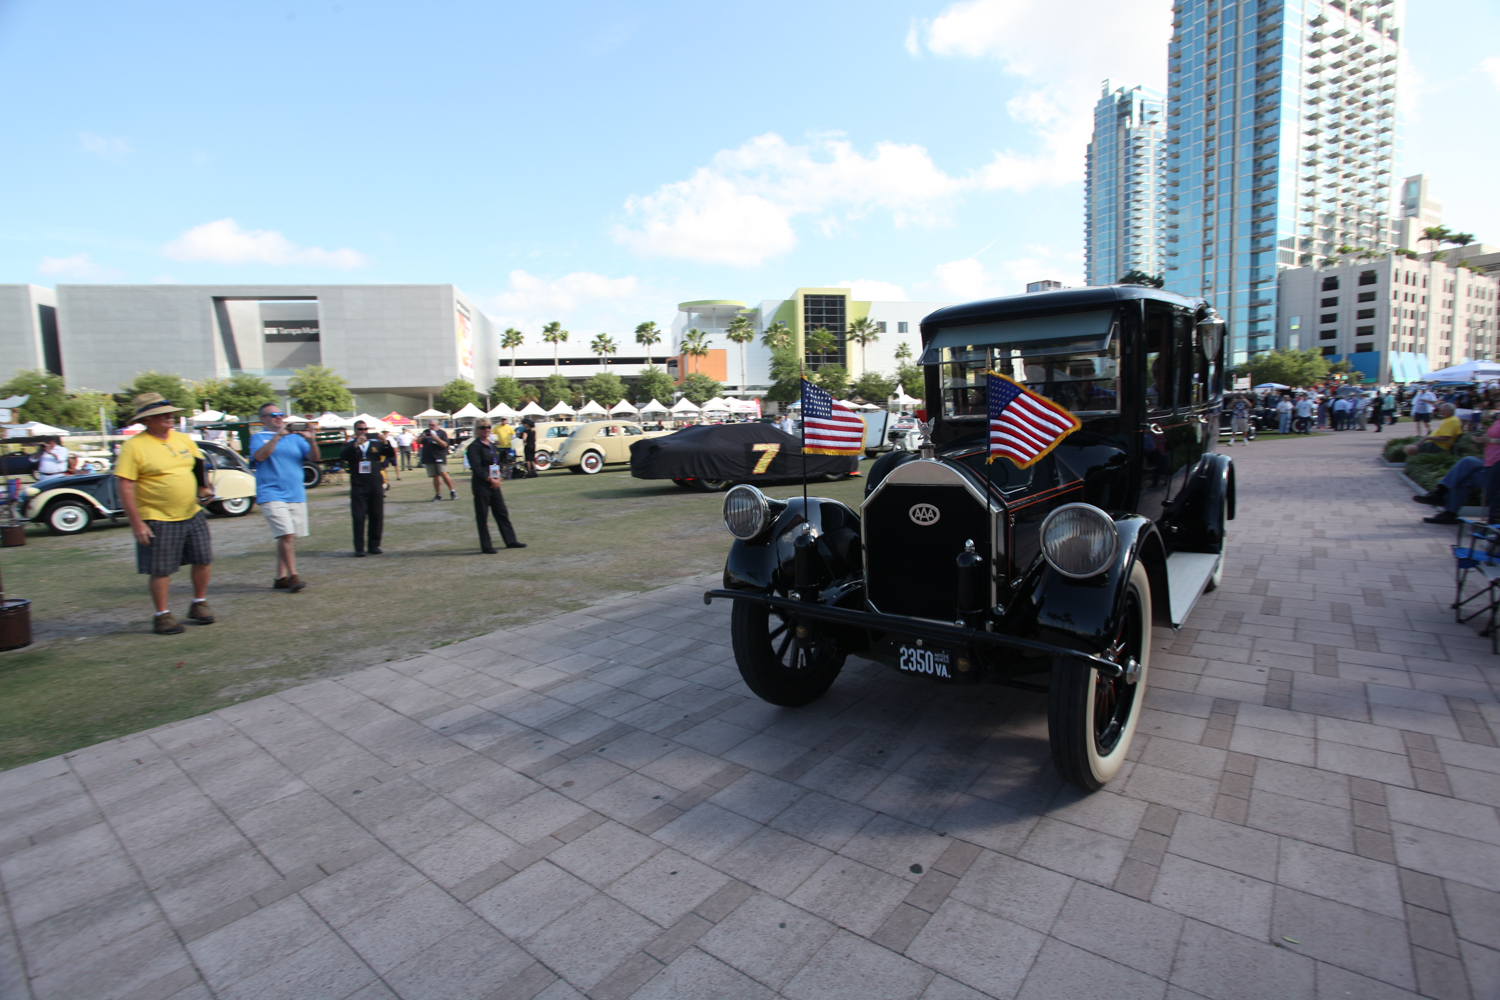 The show was officially opened when President Woodrow Wilson's 1919 Pierce-Arrow limo was driven onto the field. 